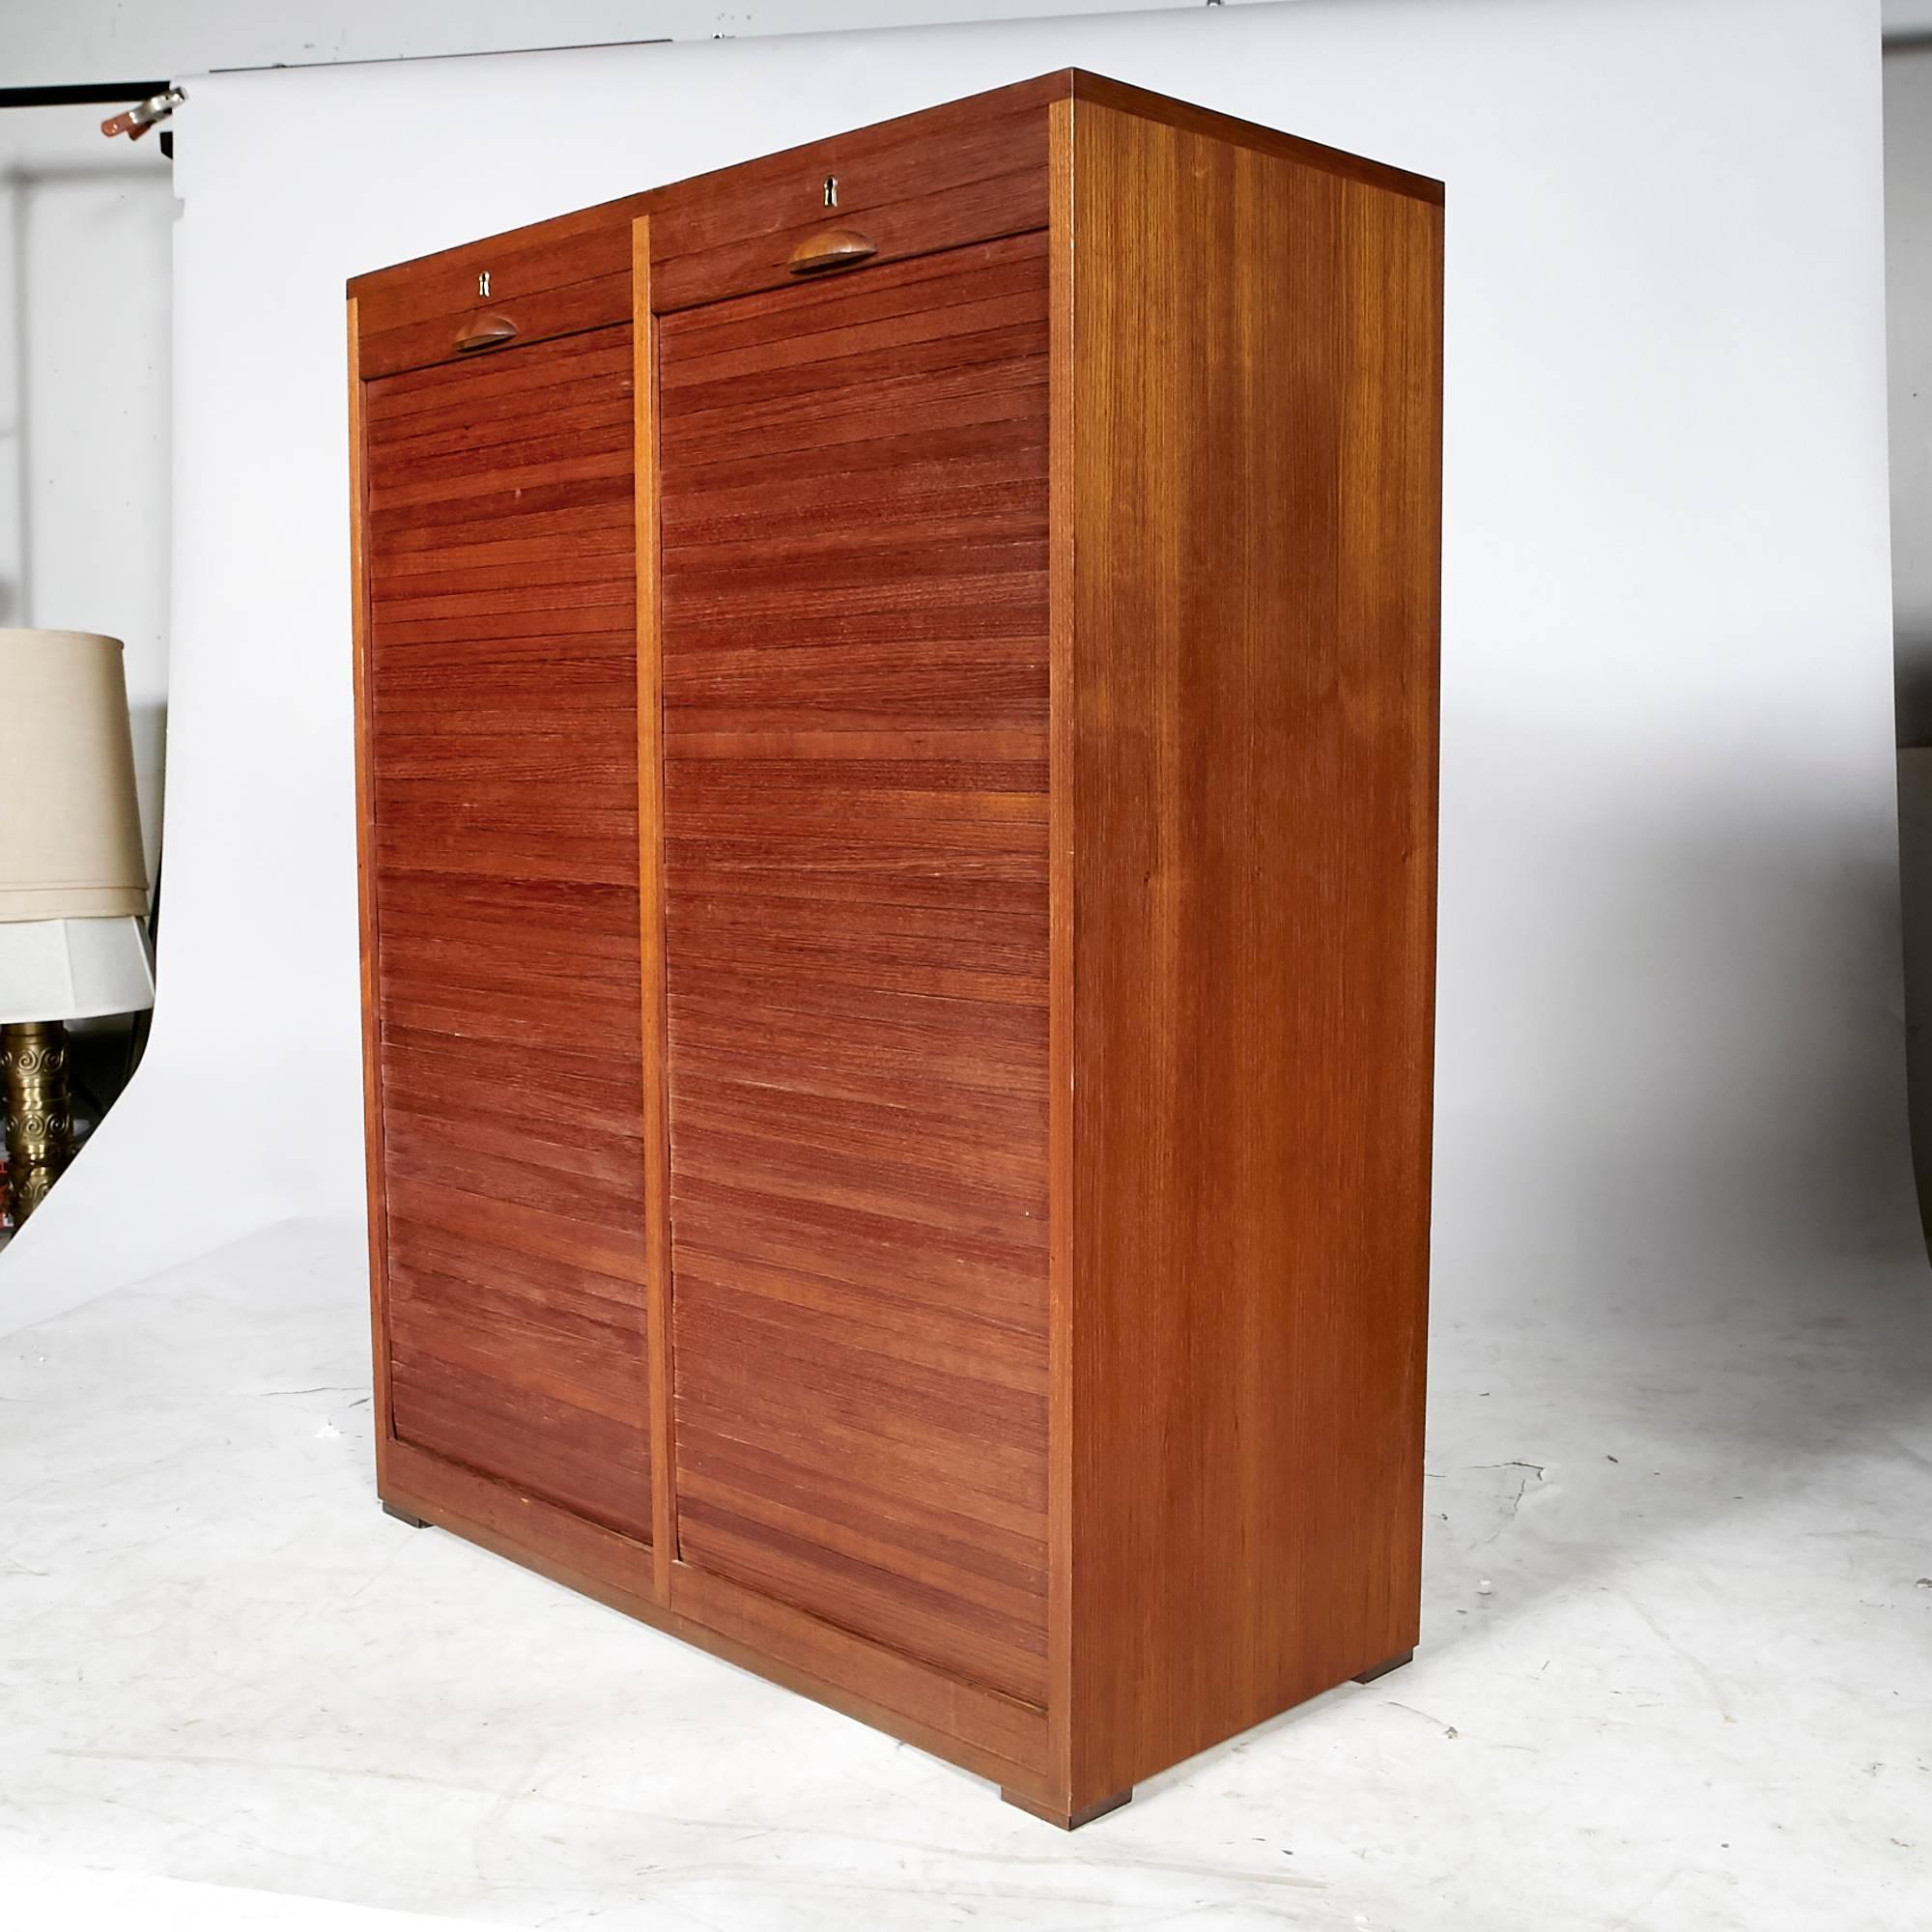 Vintage Scandinavian Modern Danish teak tambour front flat file and storage cabinet by Frej-Odense, circa 1960s. Cabinet features two pull down tambour doors that reveal ten beach wood & birch filing drawers on each side. Includes one locking key.